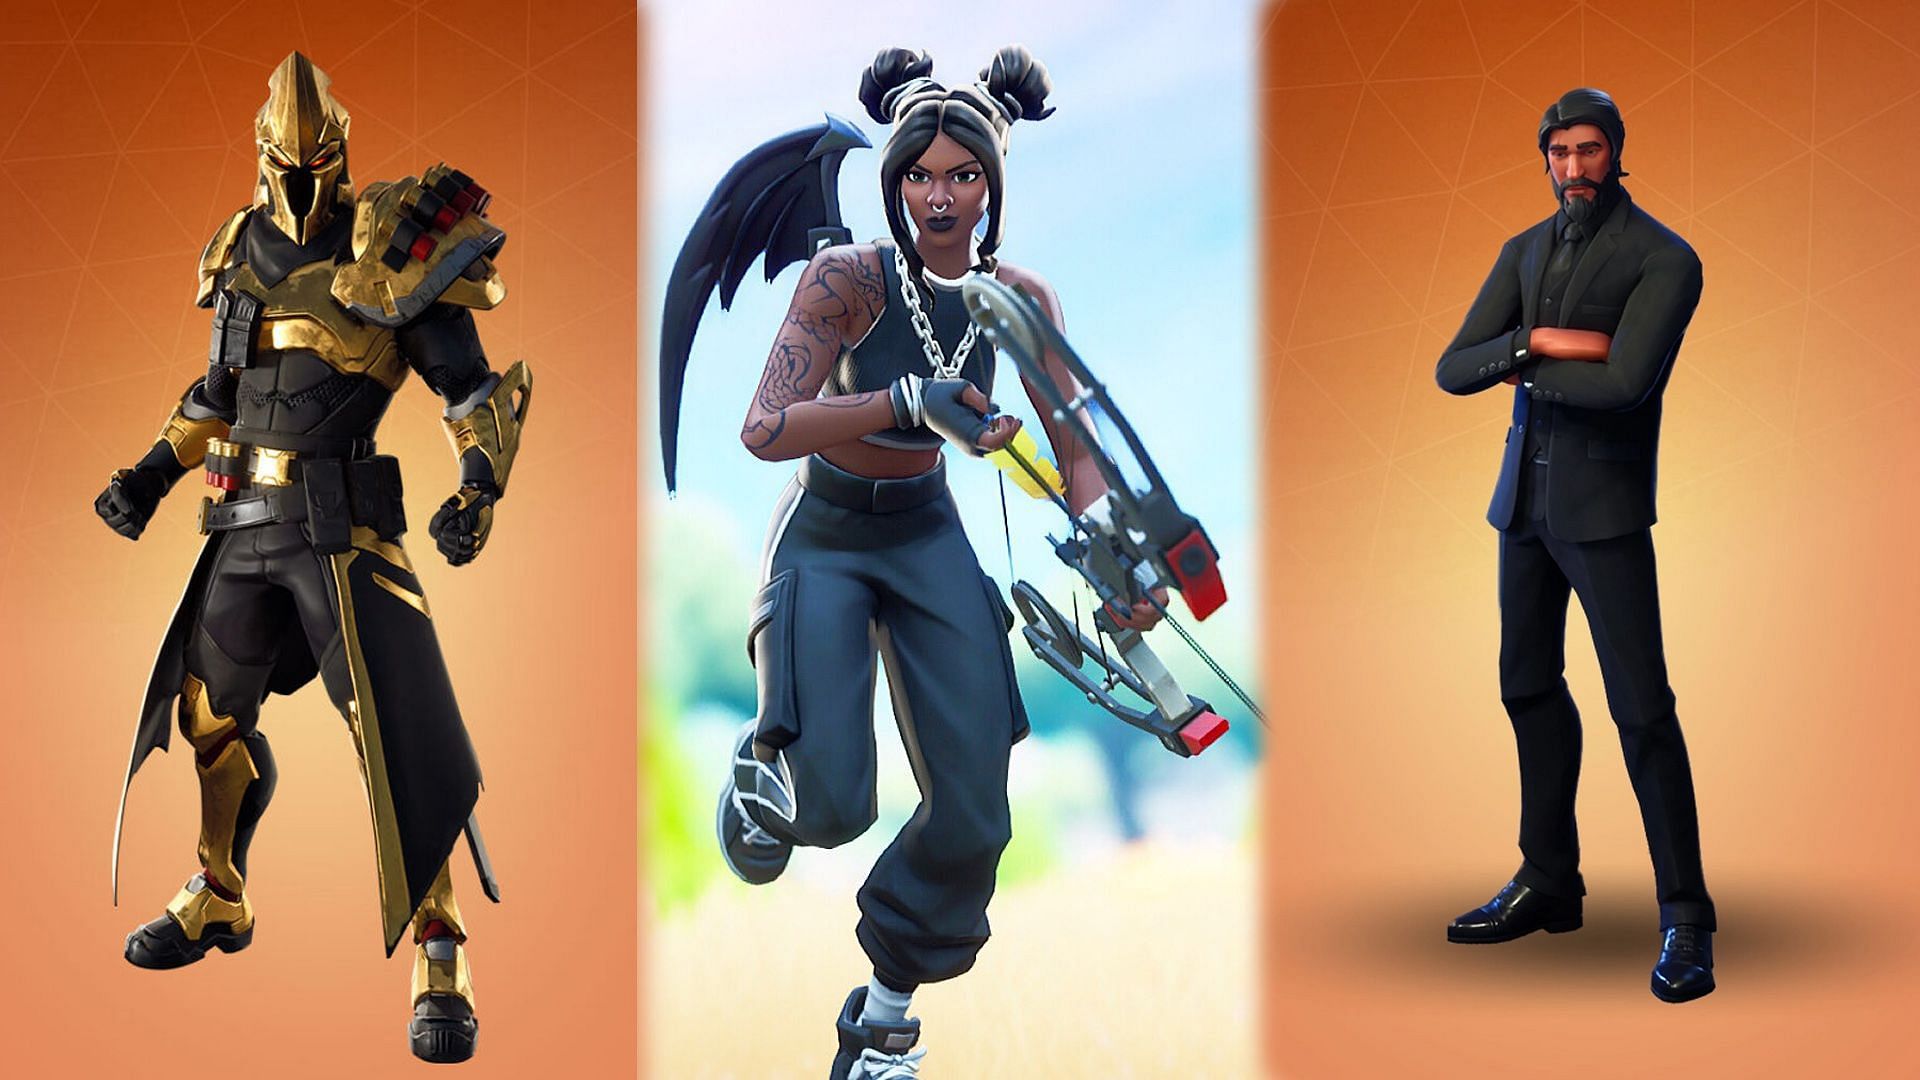 All Fortnite Chapter 1 Tier 100 skins are comically described (Image via Epic Games)